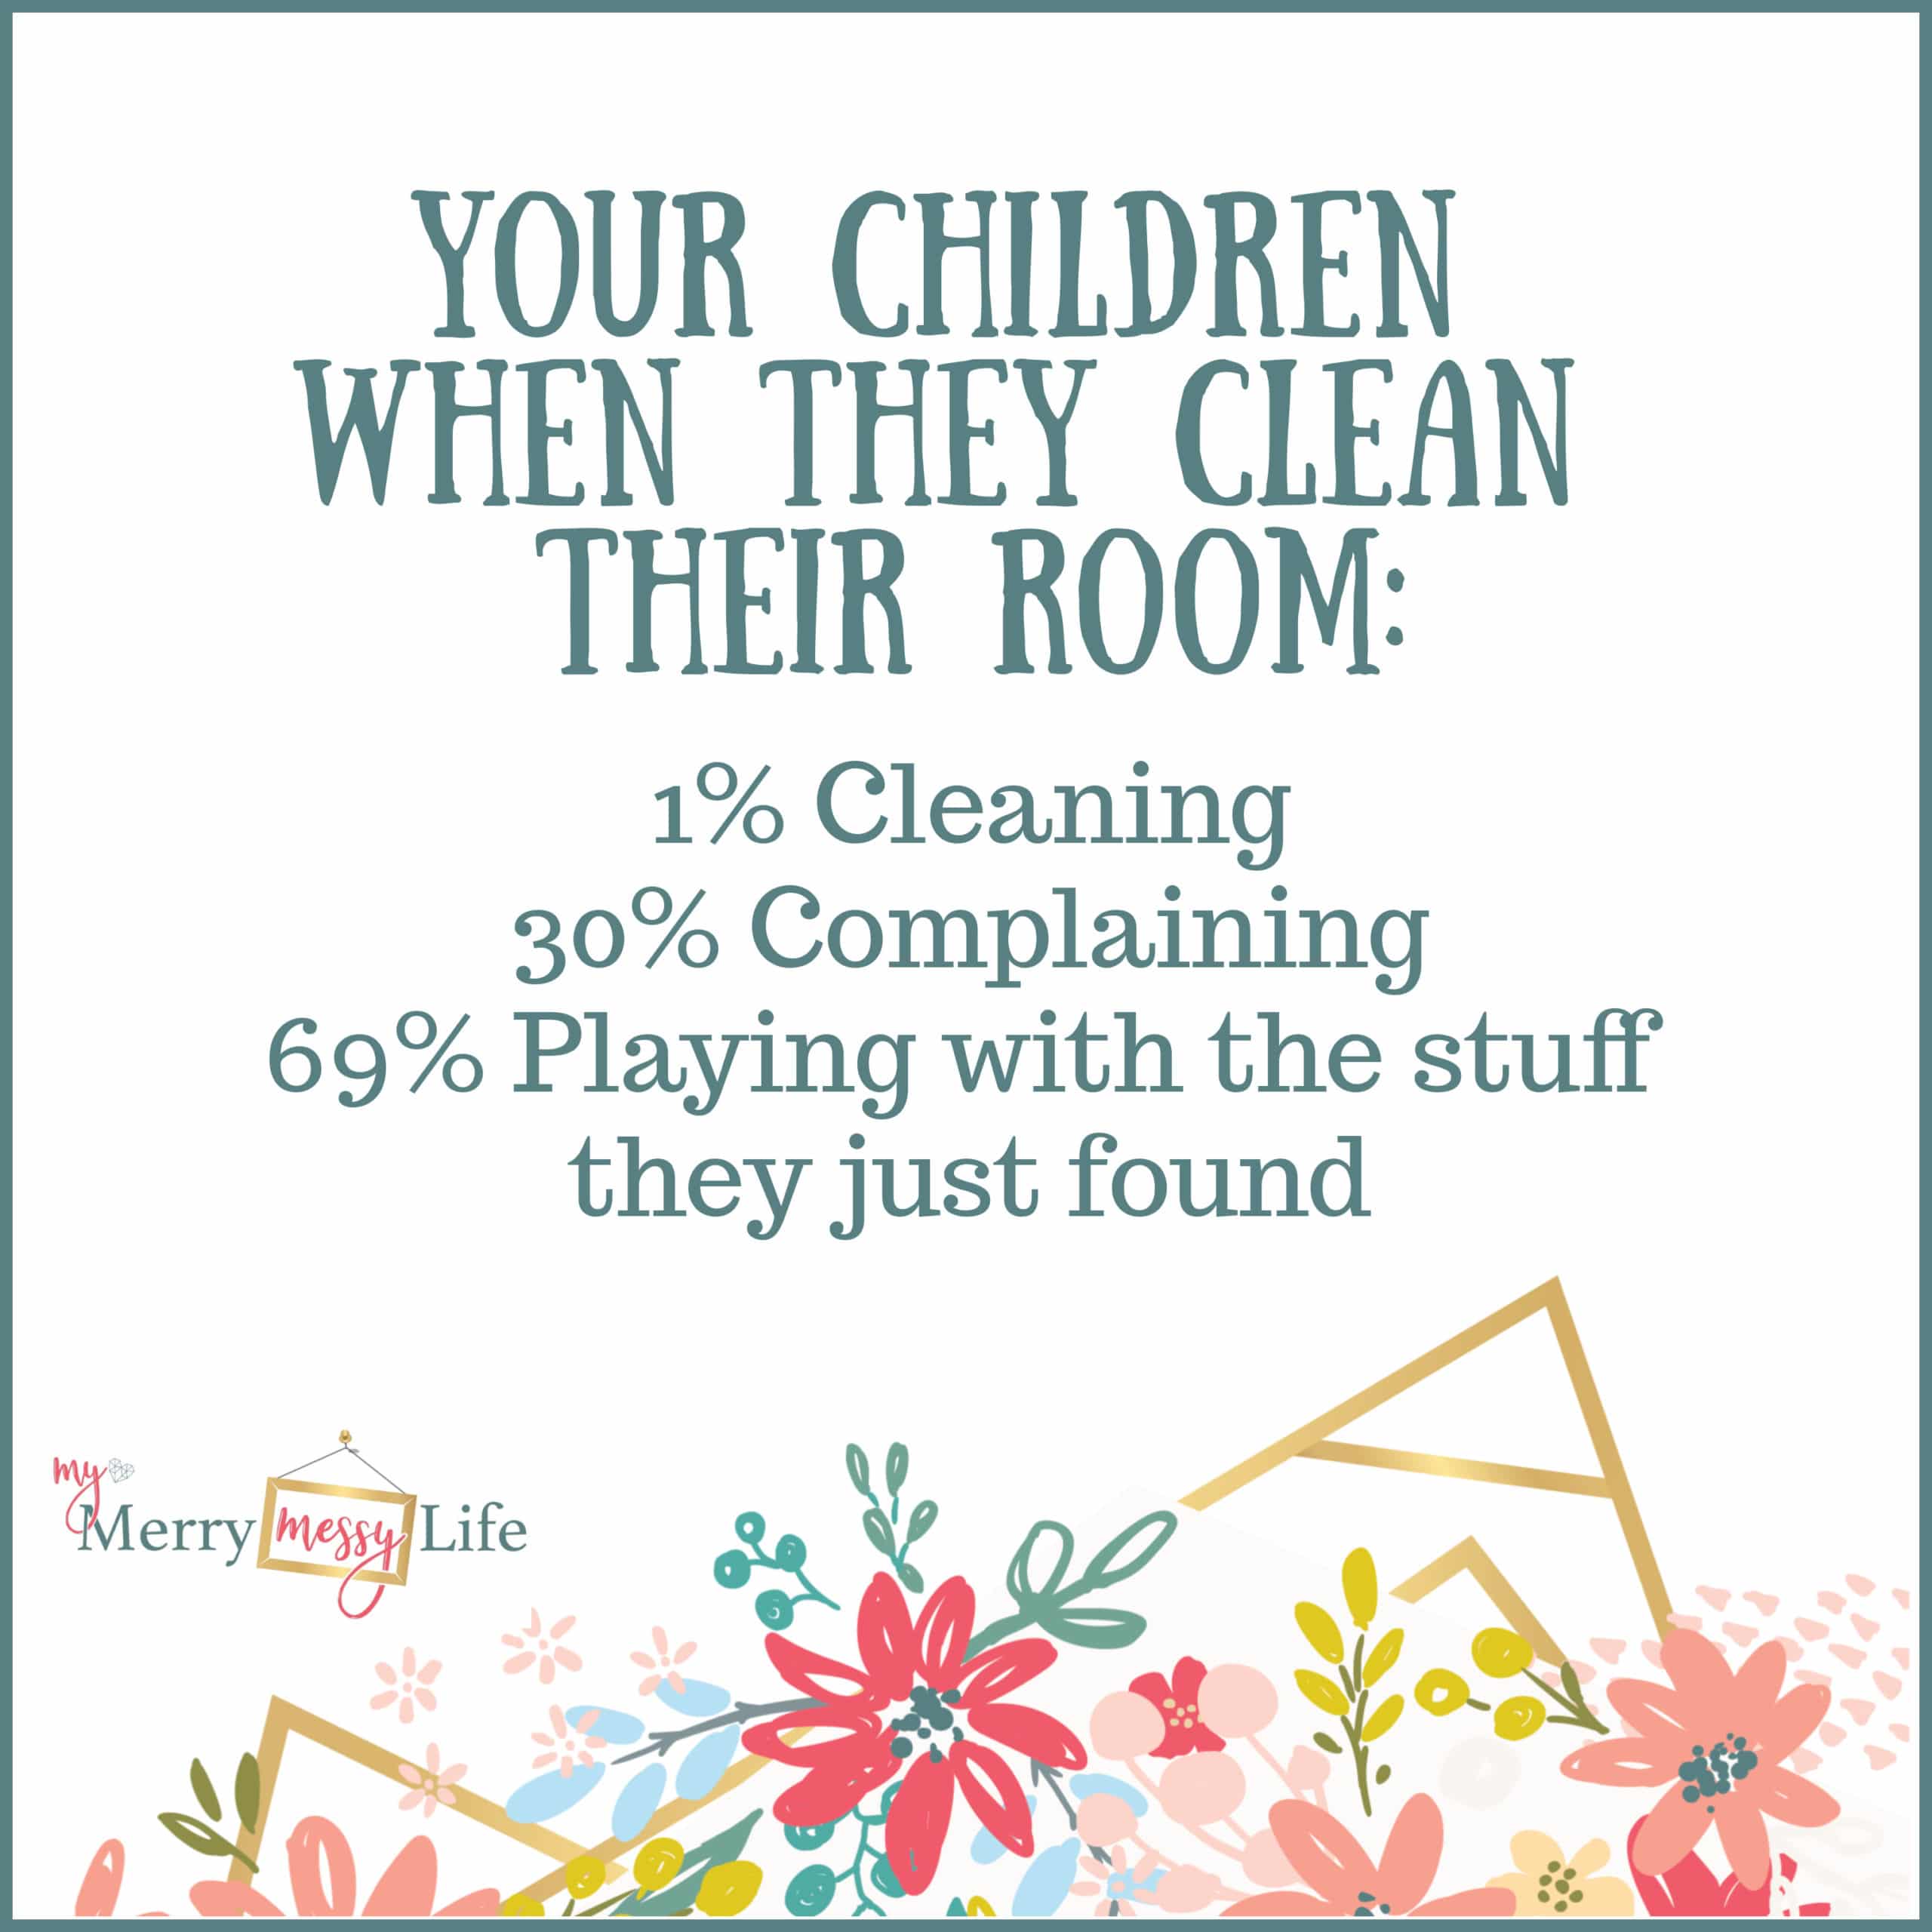 When children clean their rooms - 1% cleaning, 30% complaining, 69% playing with the stuff they just found. Funny Mom Memes